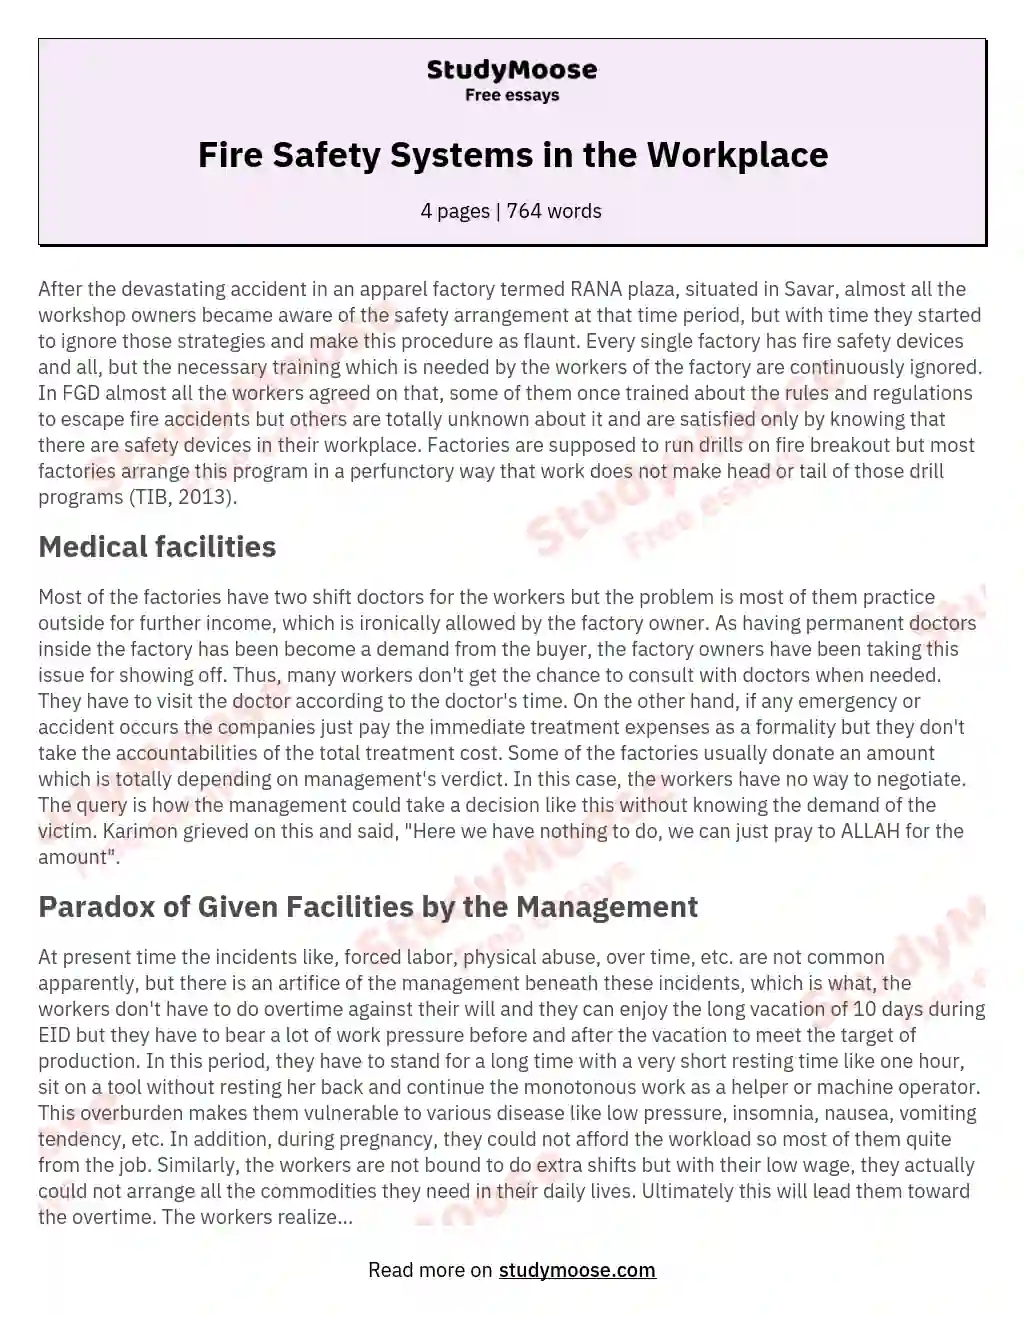 Fire Safety Systems in the Workplace